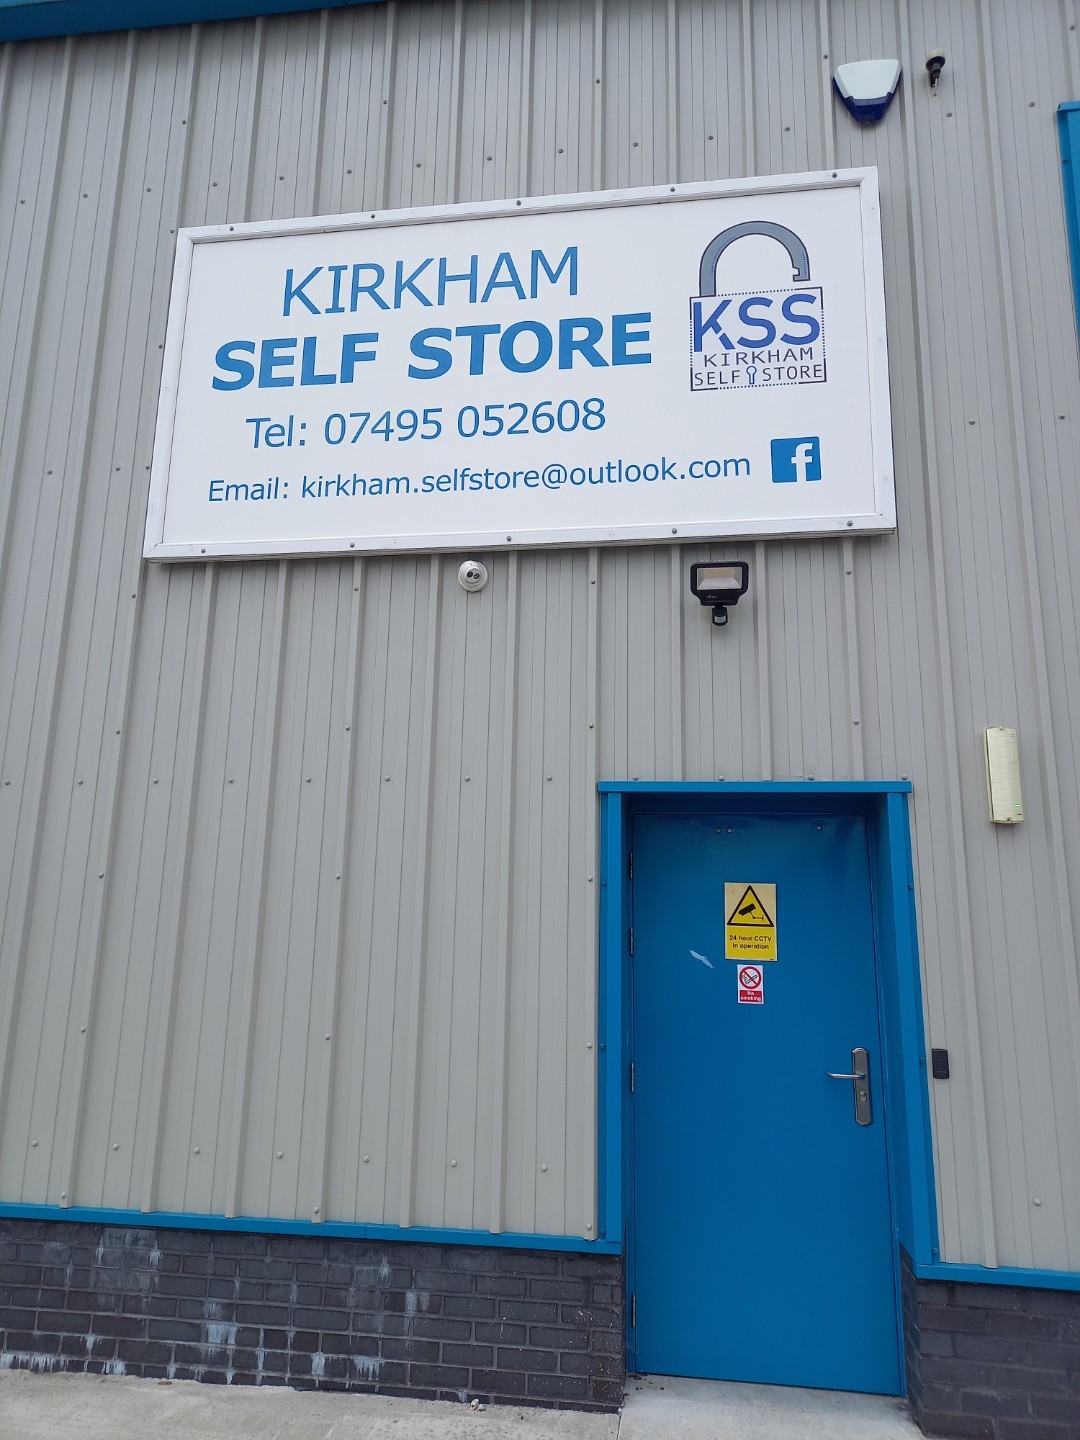 We are delighted to welcome on board our new partner, Kirkham Self Store